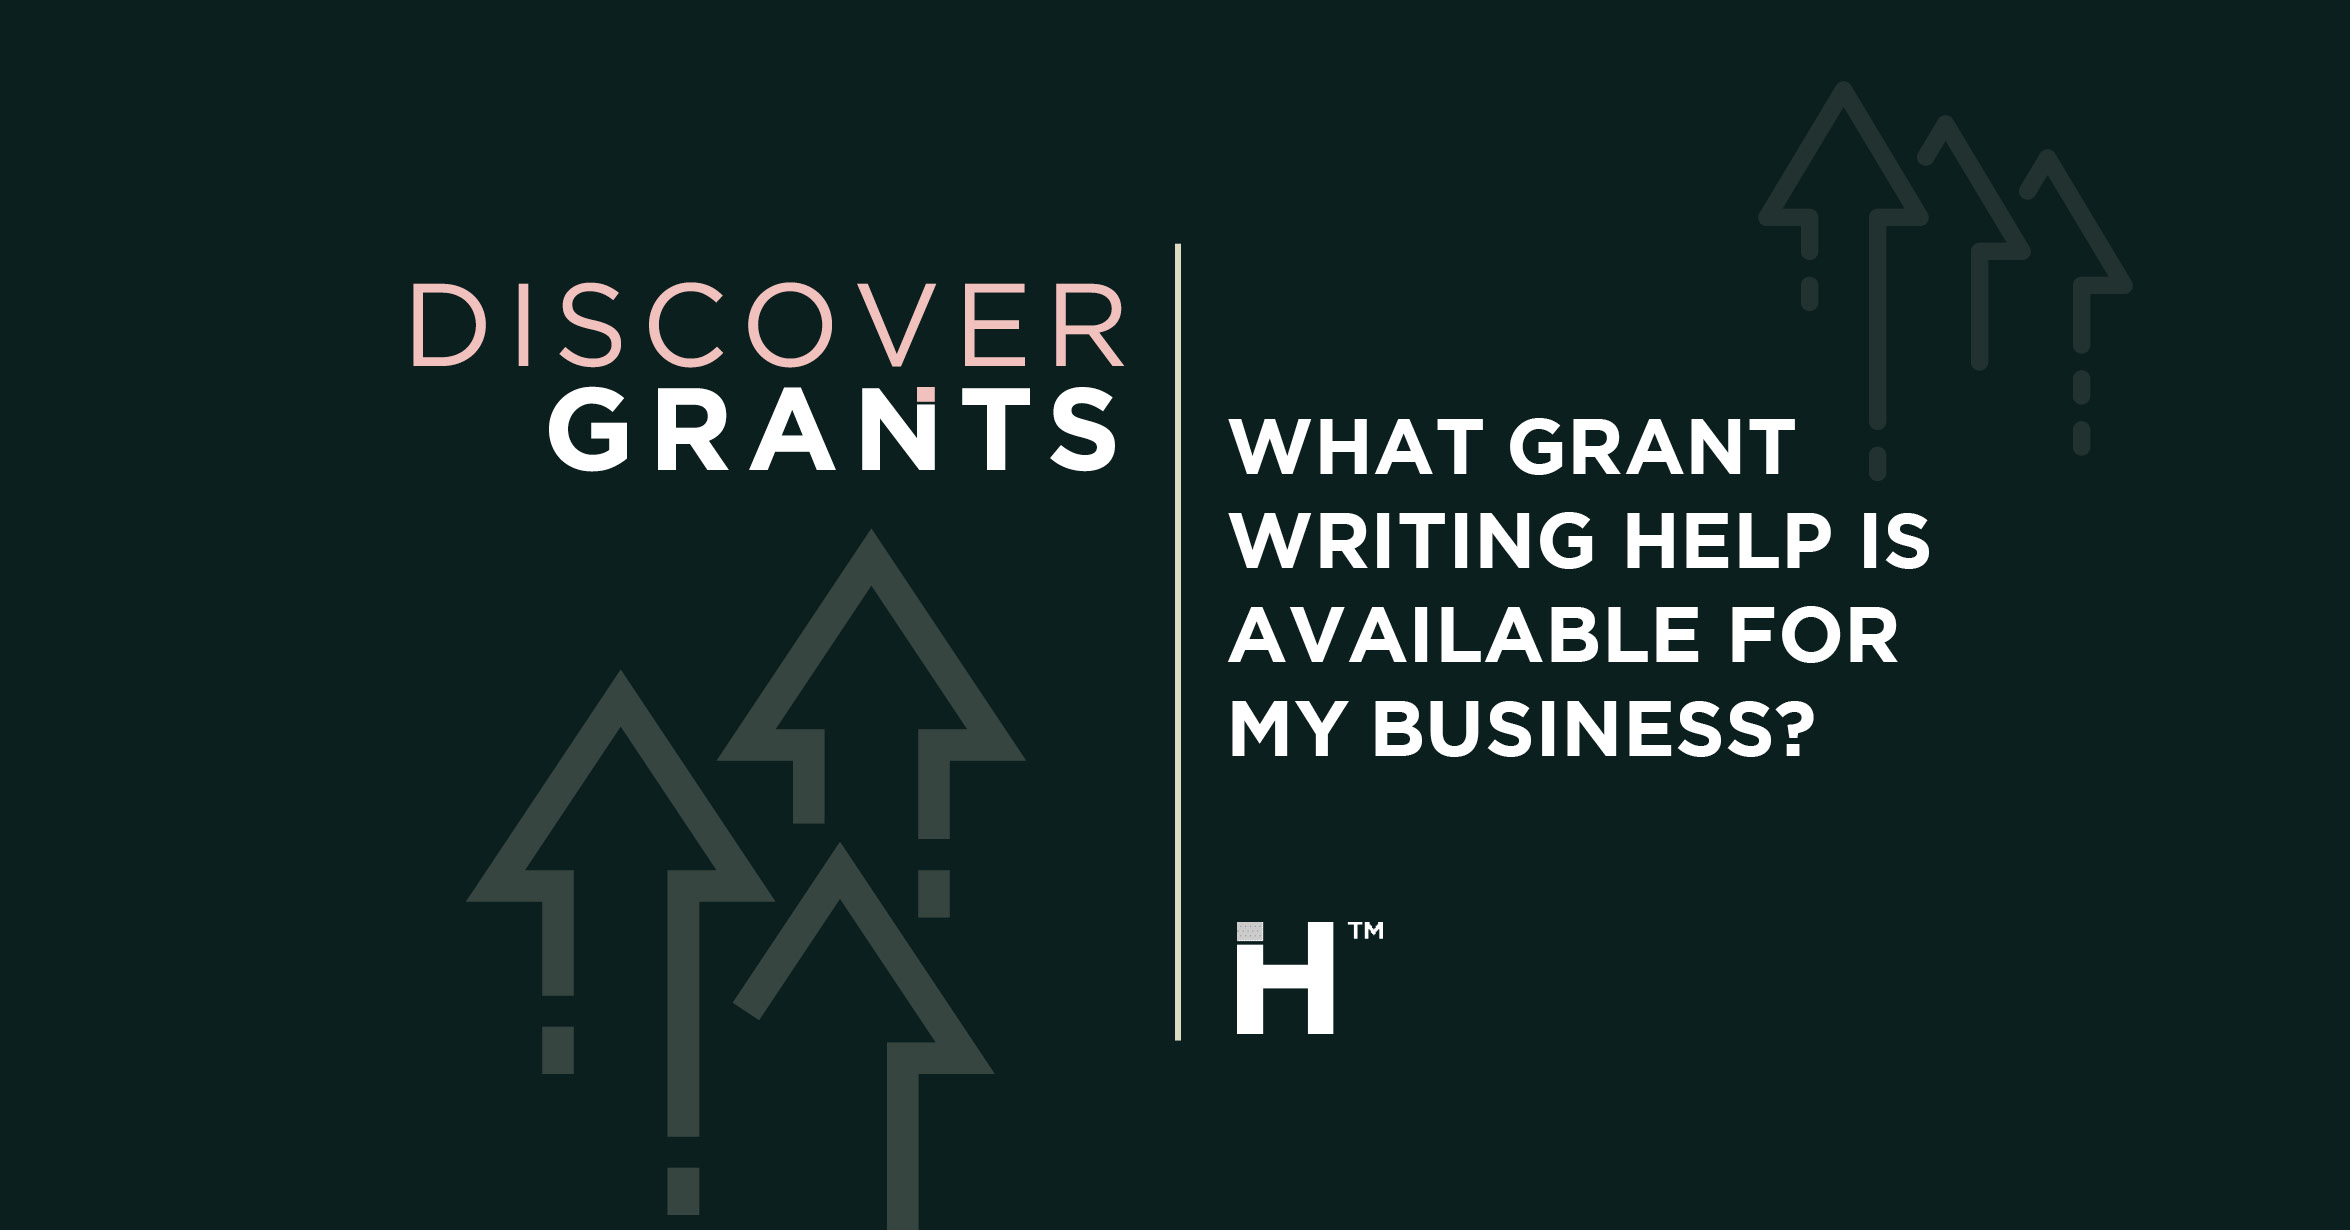 Grant Writing Help for Your Business